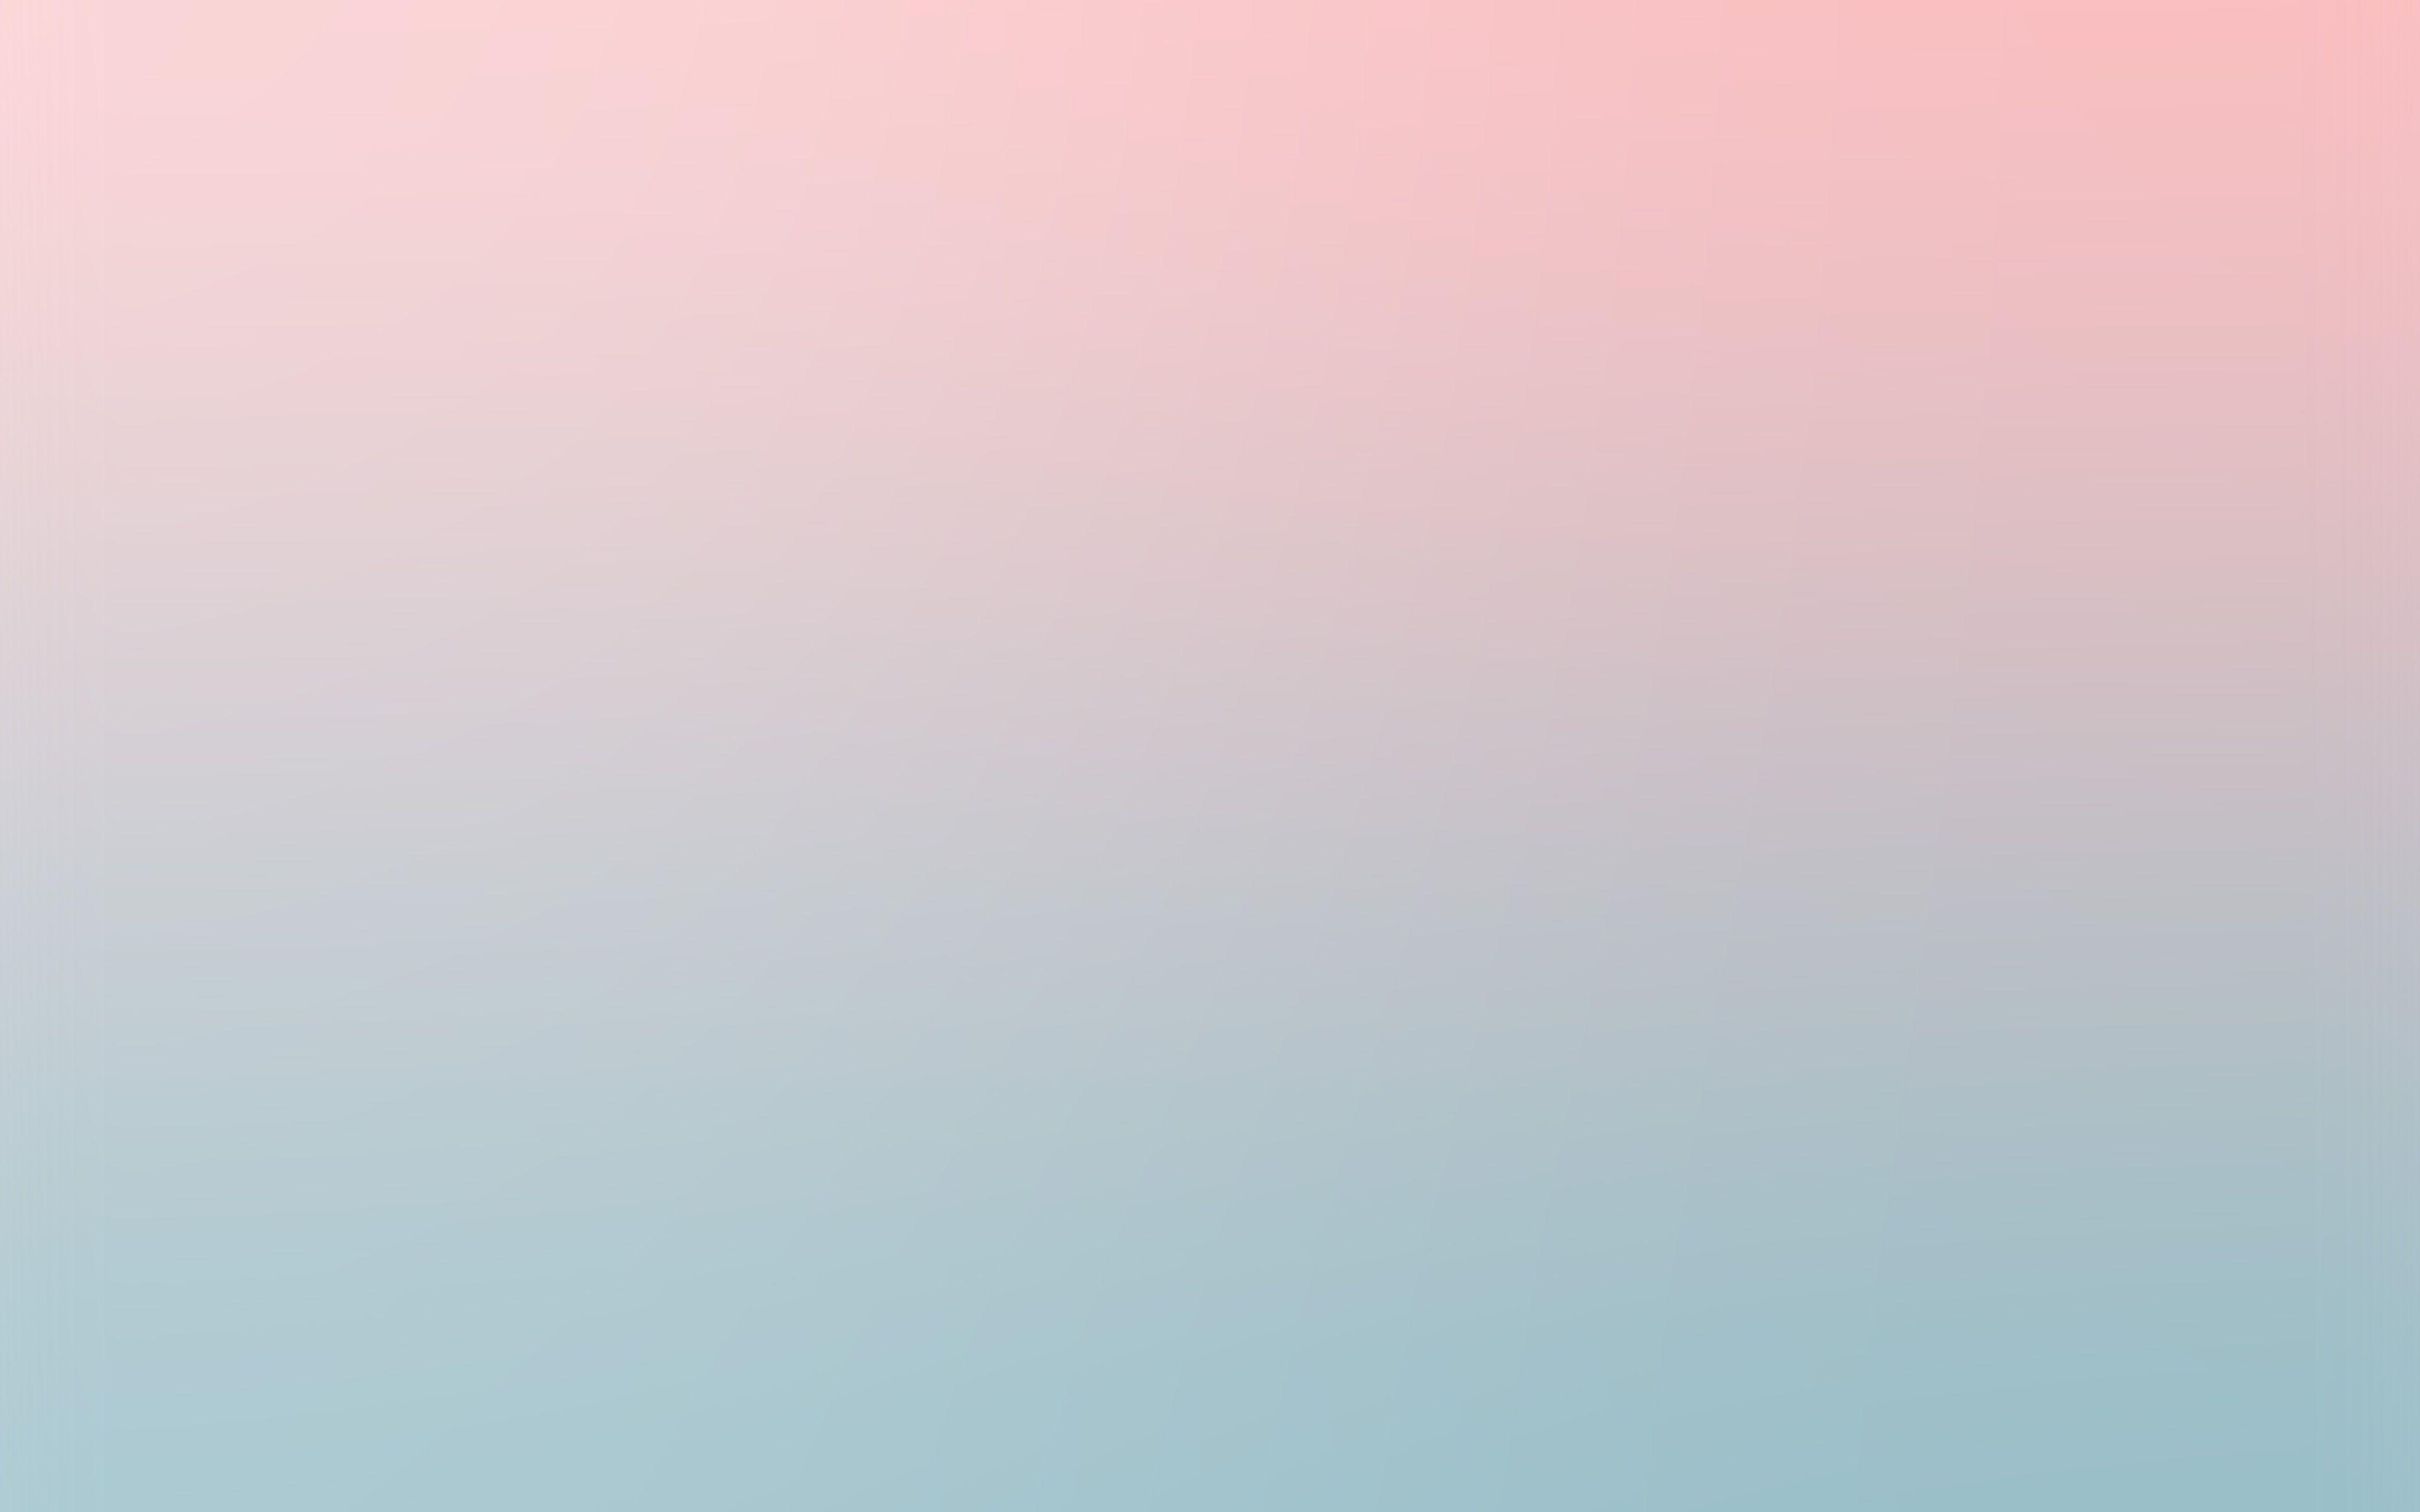 pastel pink and purple background